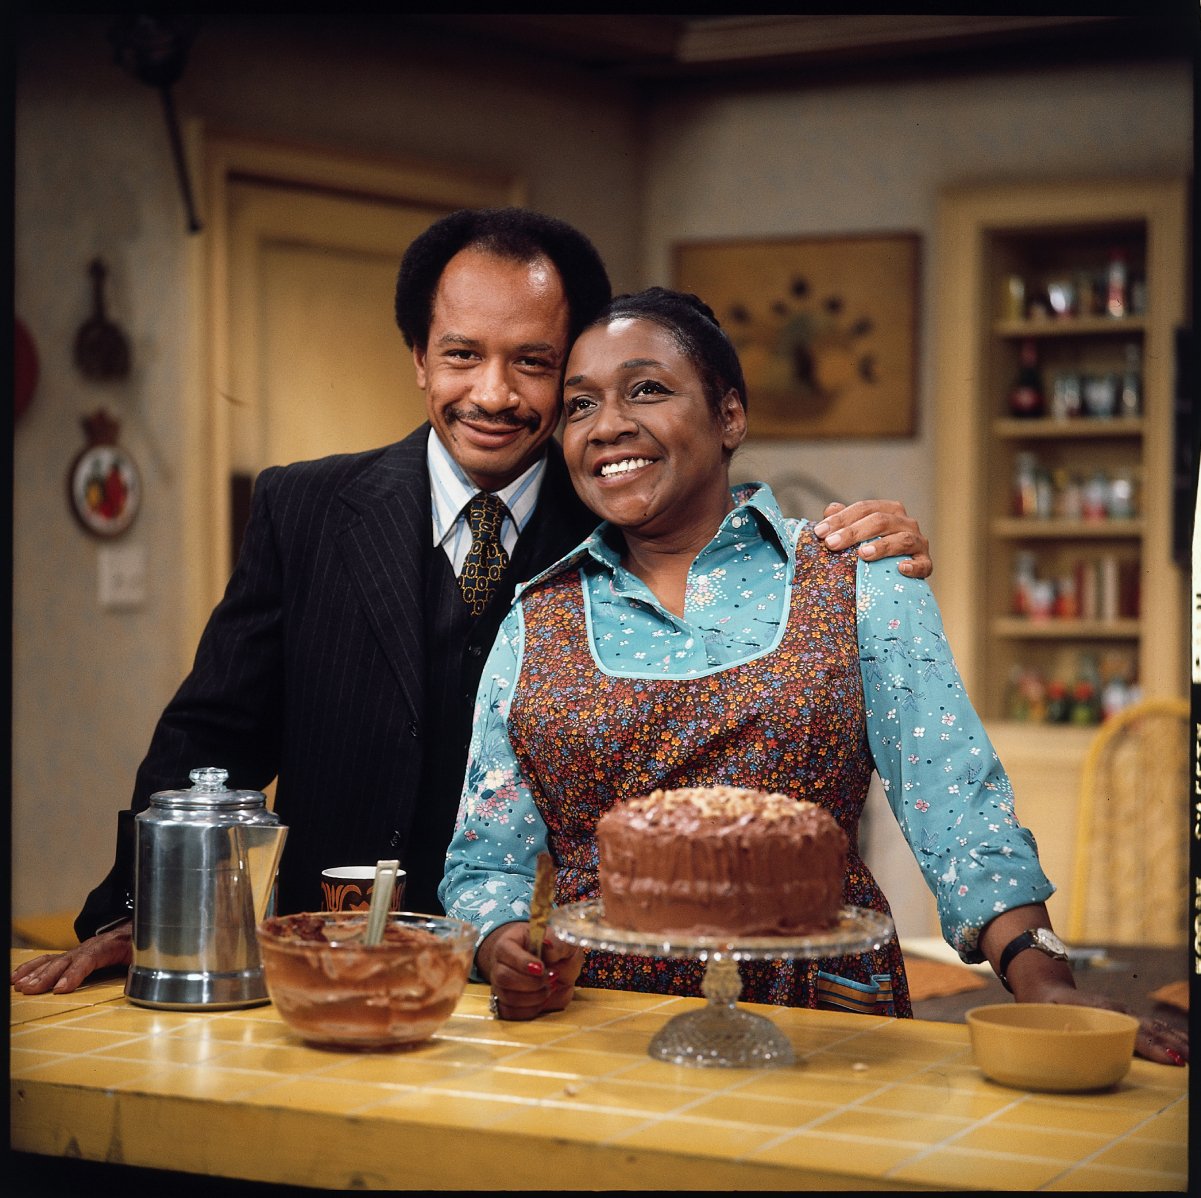 (L to R) Sherman Helmsley as George Jefferson and Isabel Sanford as his wife Louise Jefferson on 'The Jeffersons'